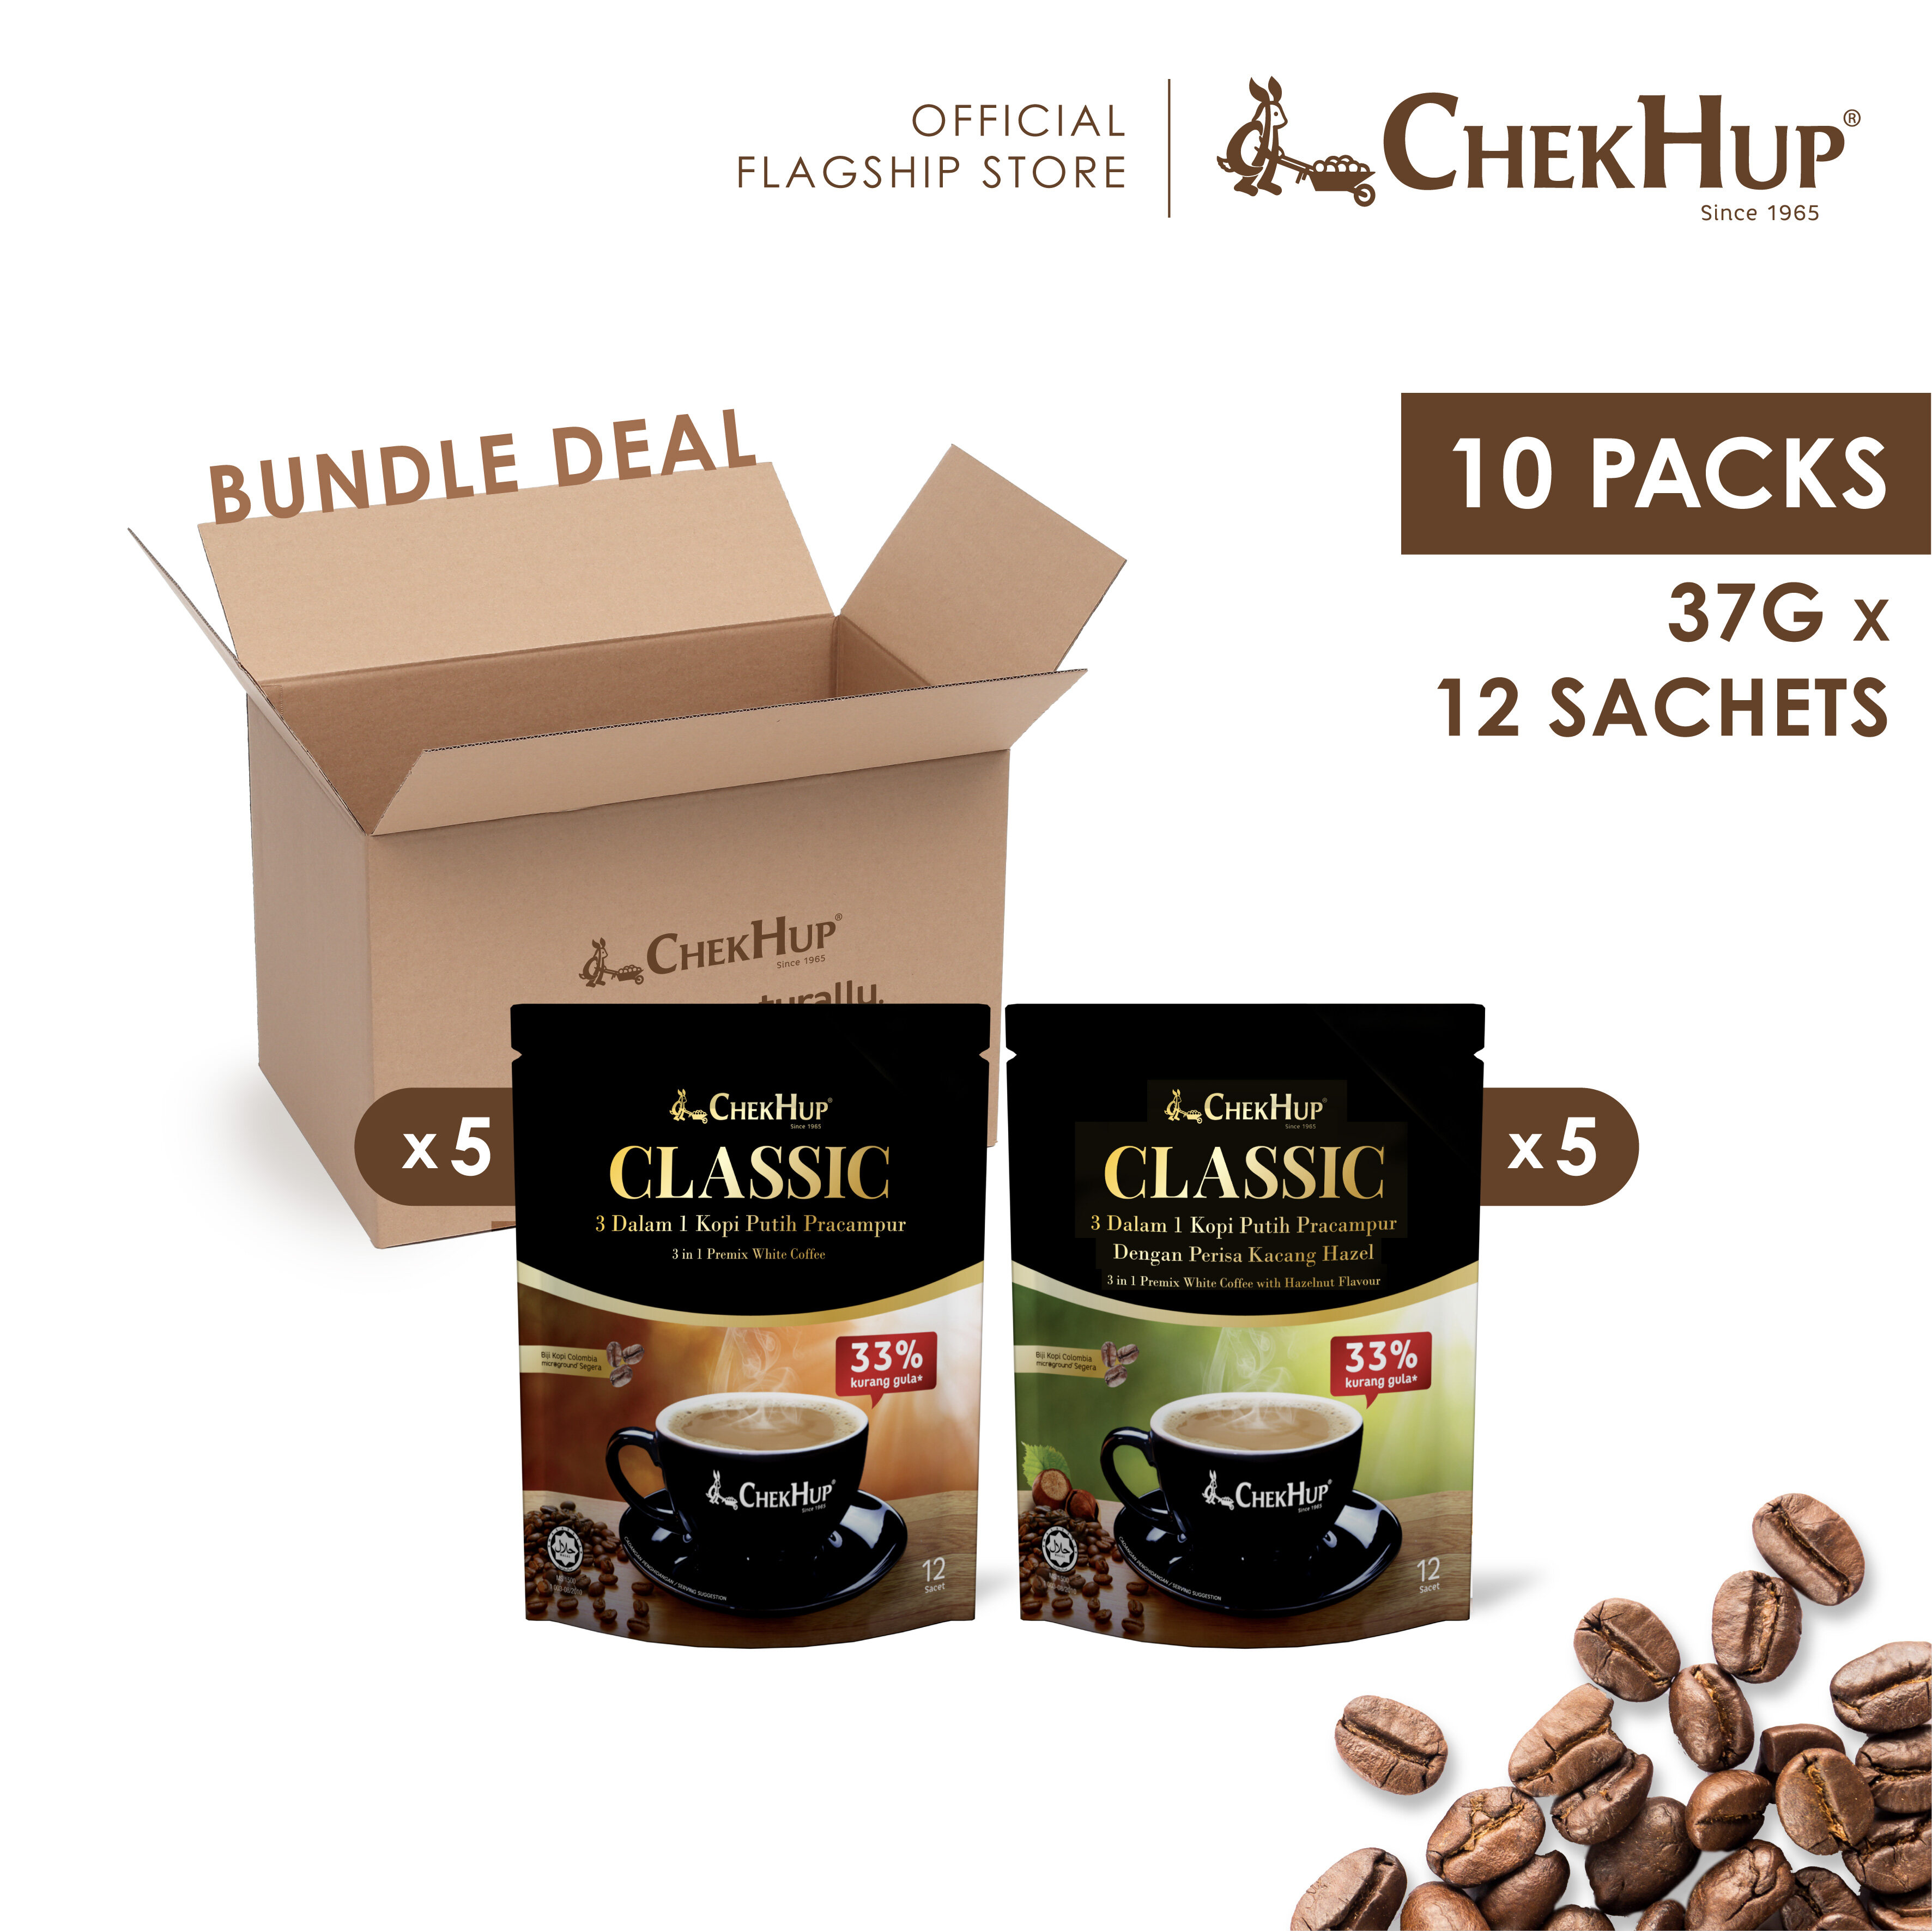 Chek Hup 3in1 Classic Colombian White Coffee (33% Less Sugar) 37g x 12s [Combo set of 5 Classic White Coffee and 5 Classic White Coffee with Hazelnut)